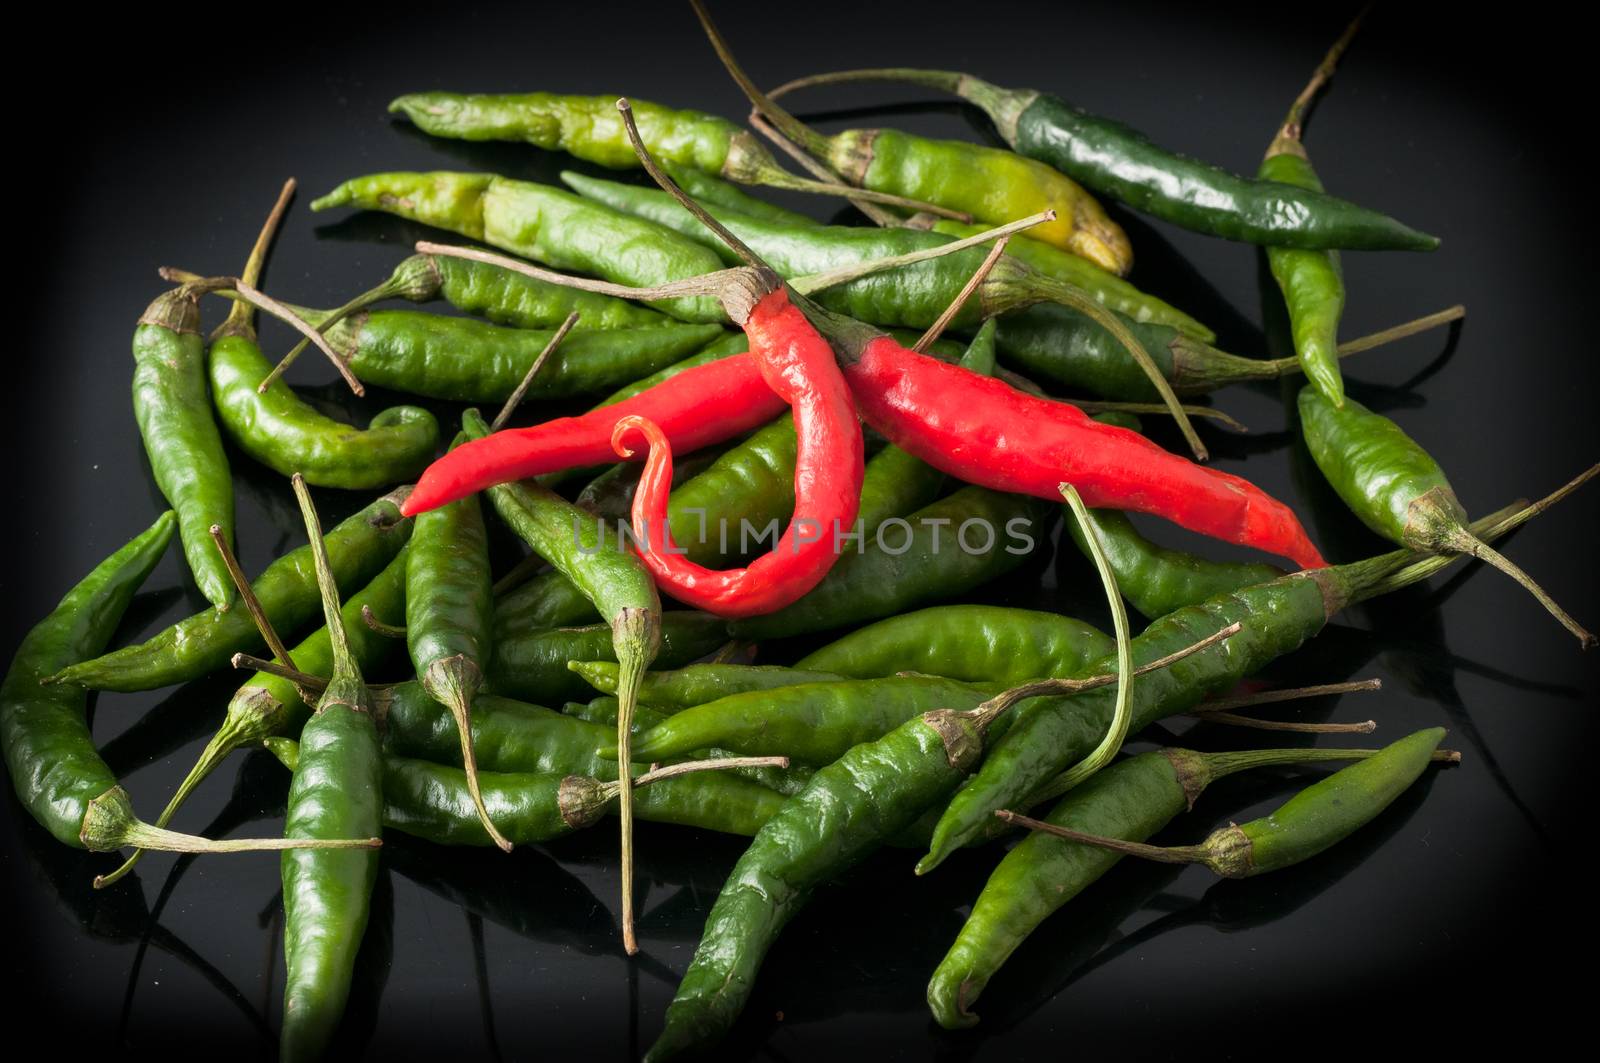 green chili peppers and red